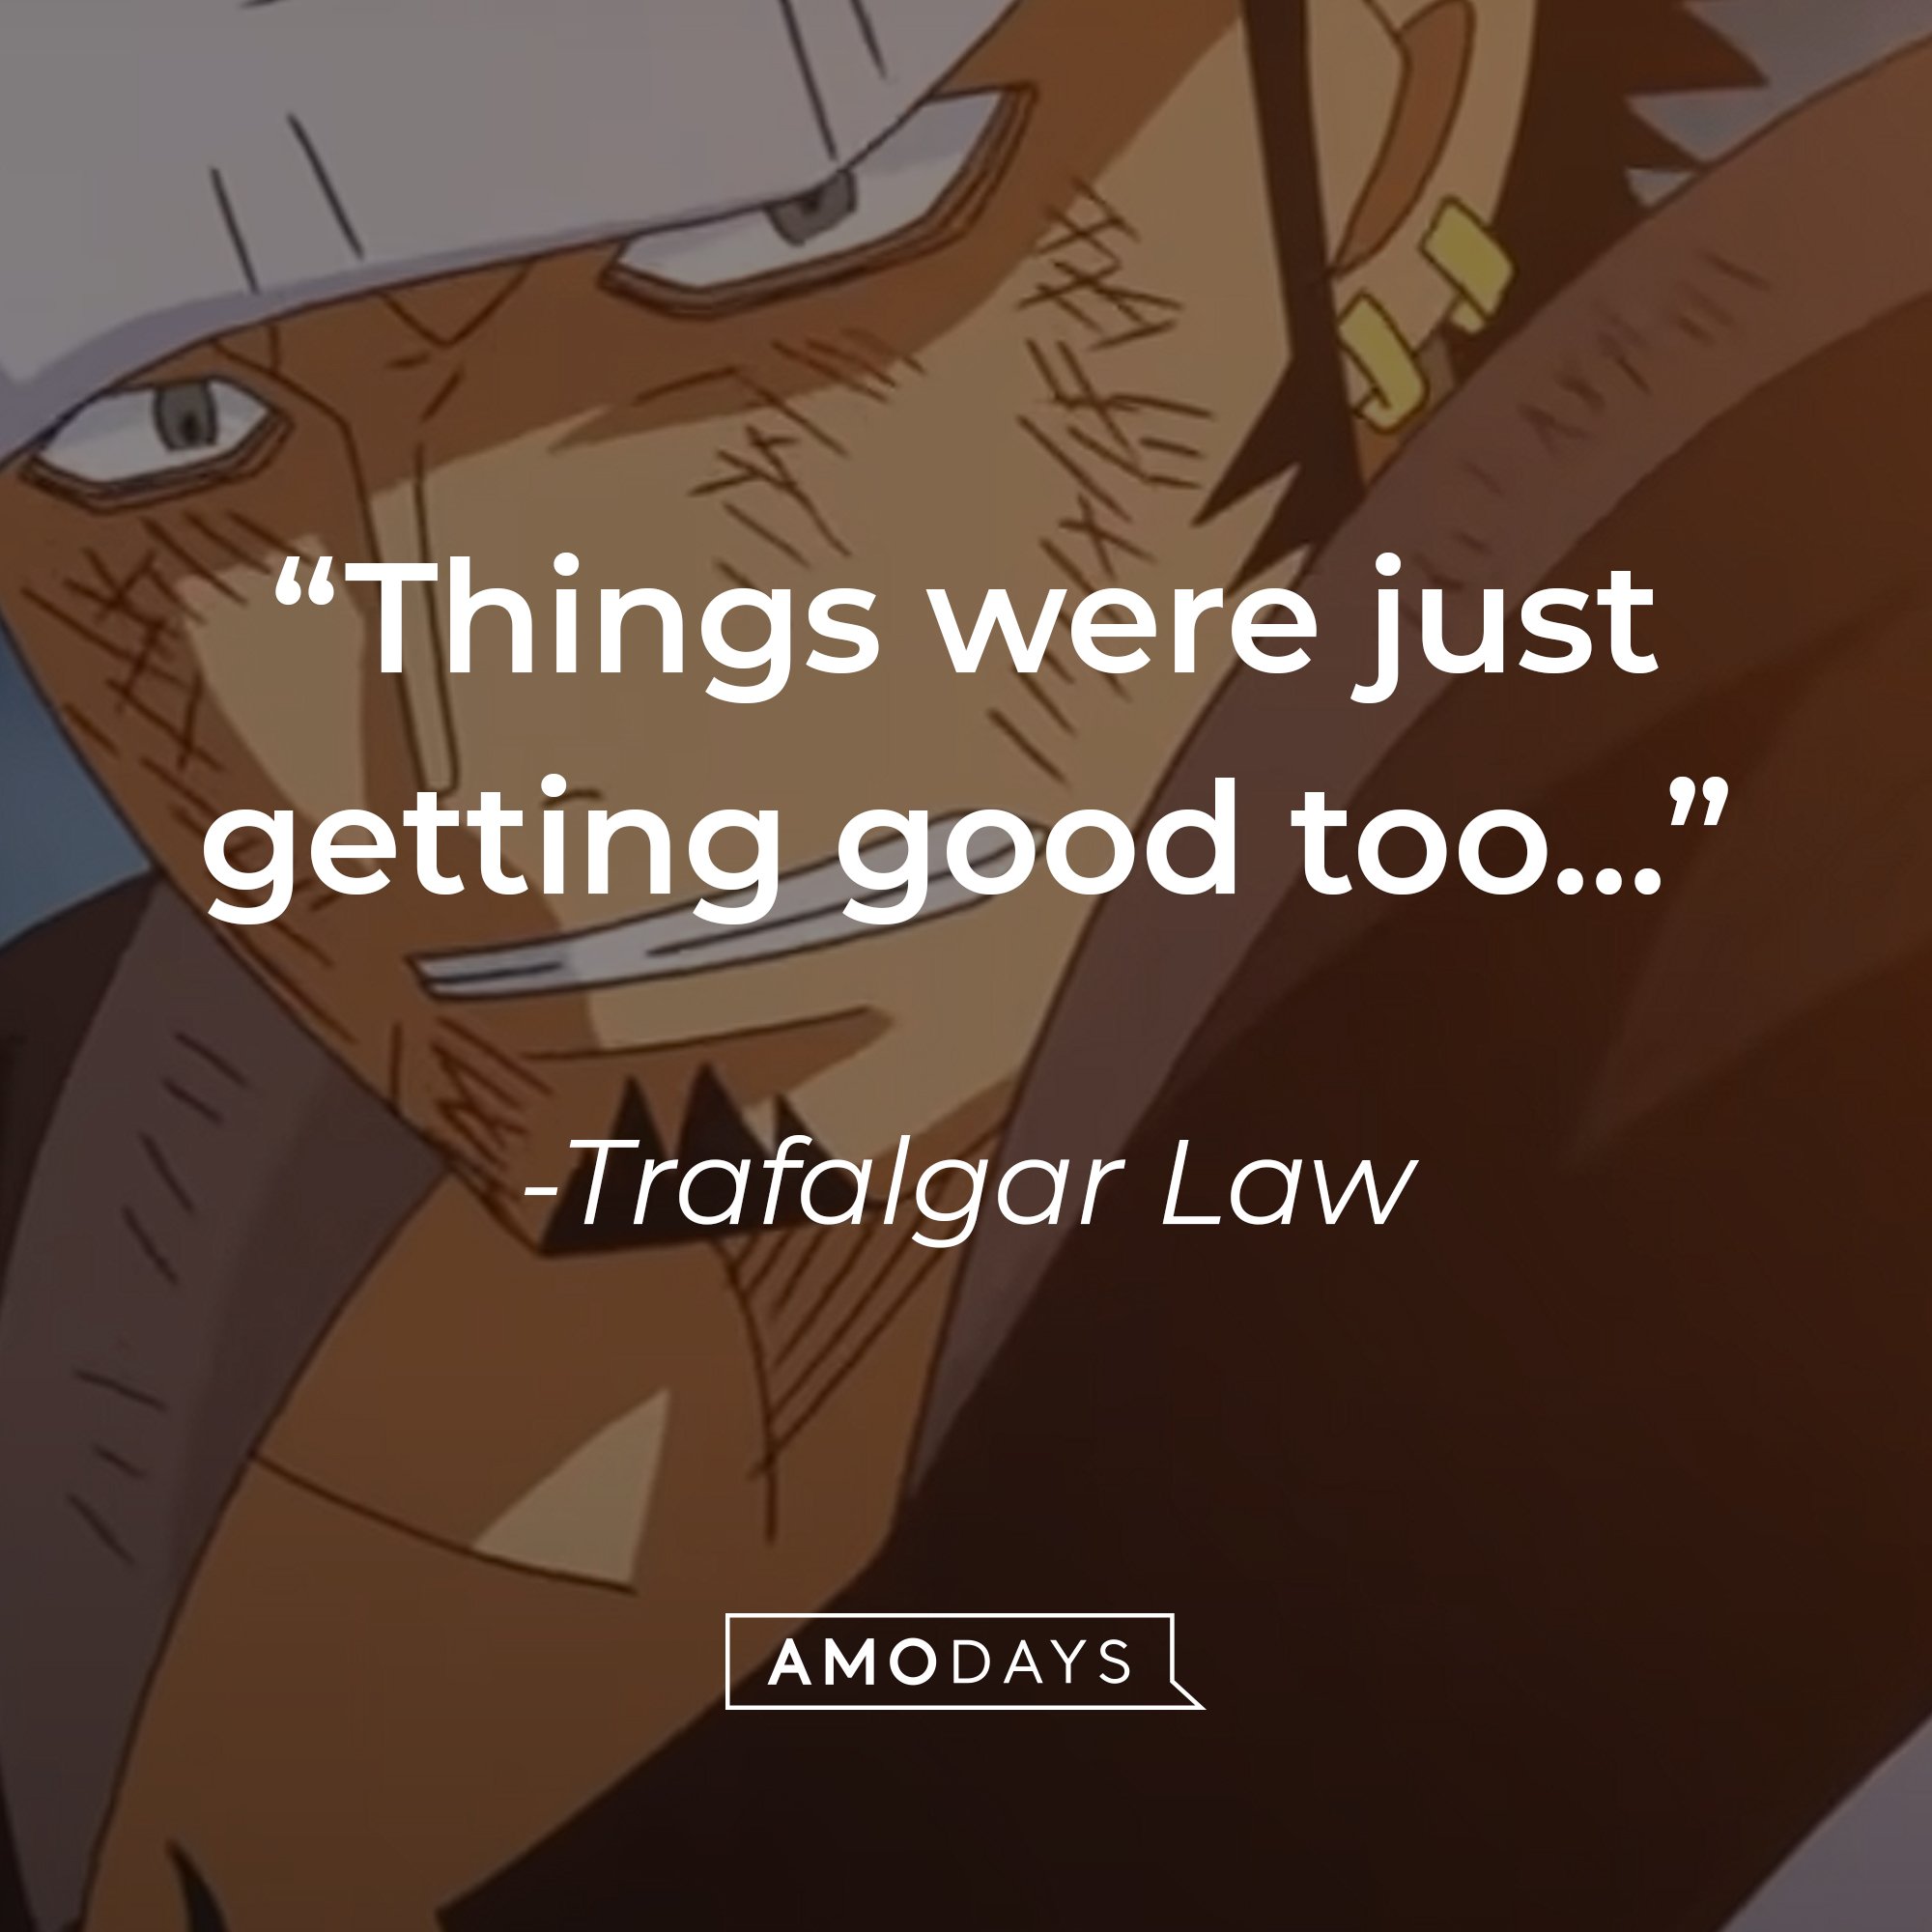 Trafalgar Law’s quote: “Things were just getting good too…" | Image: AmoDays